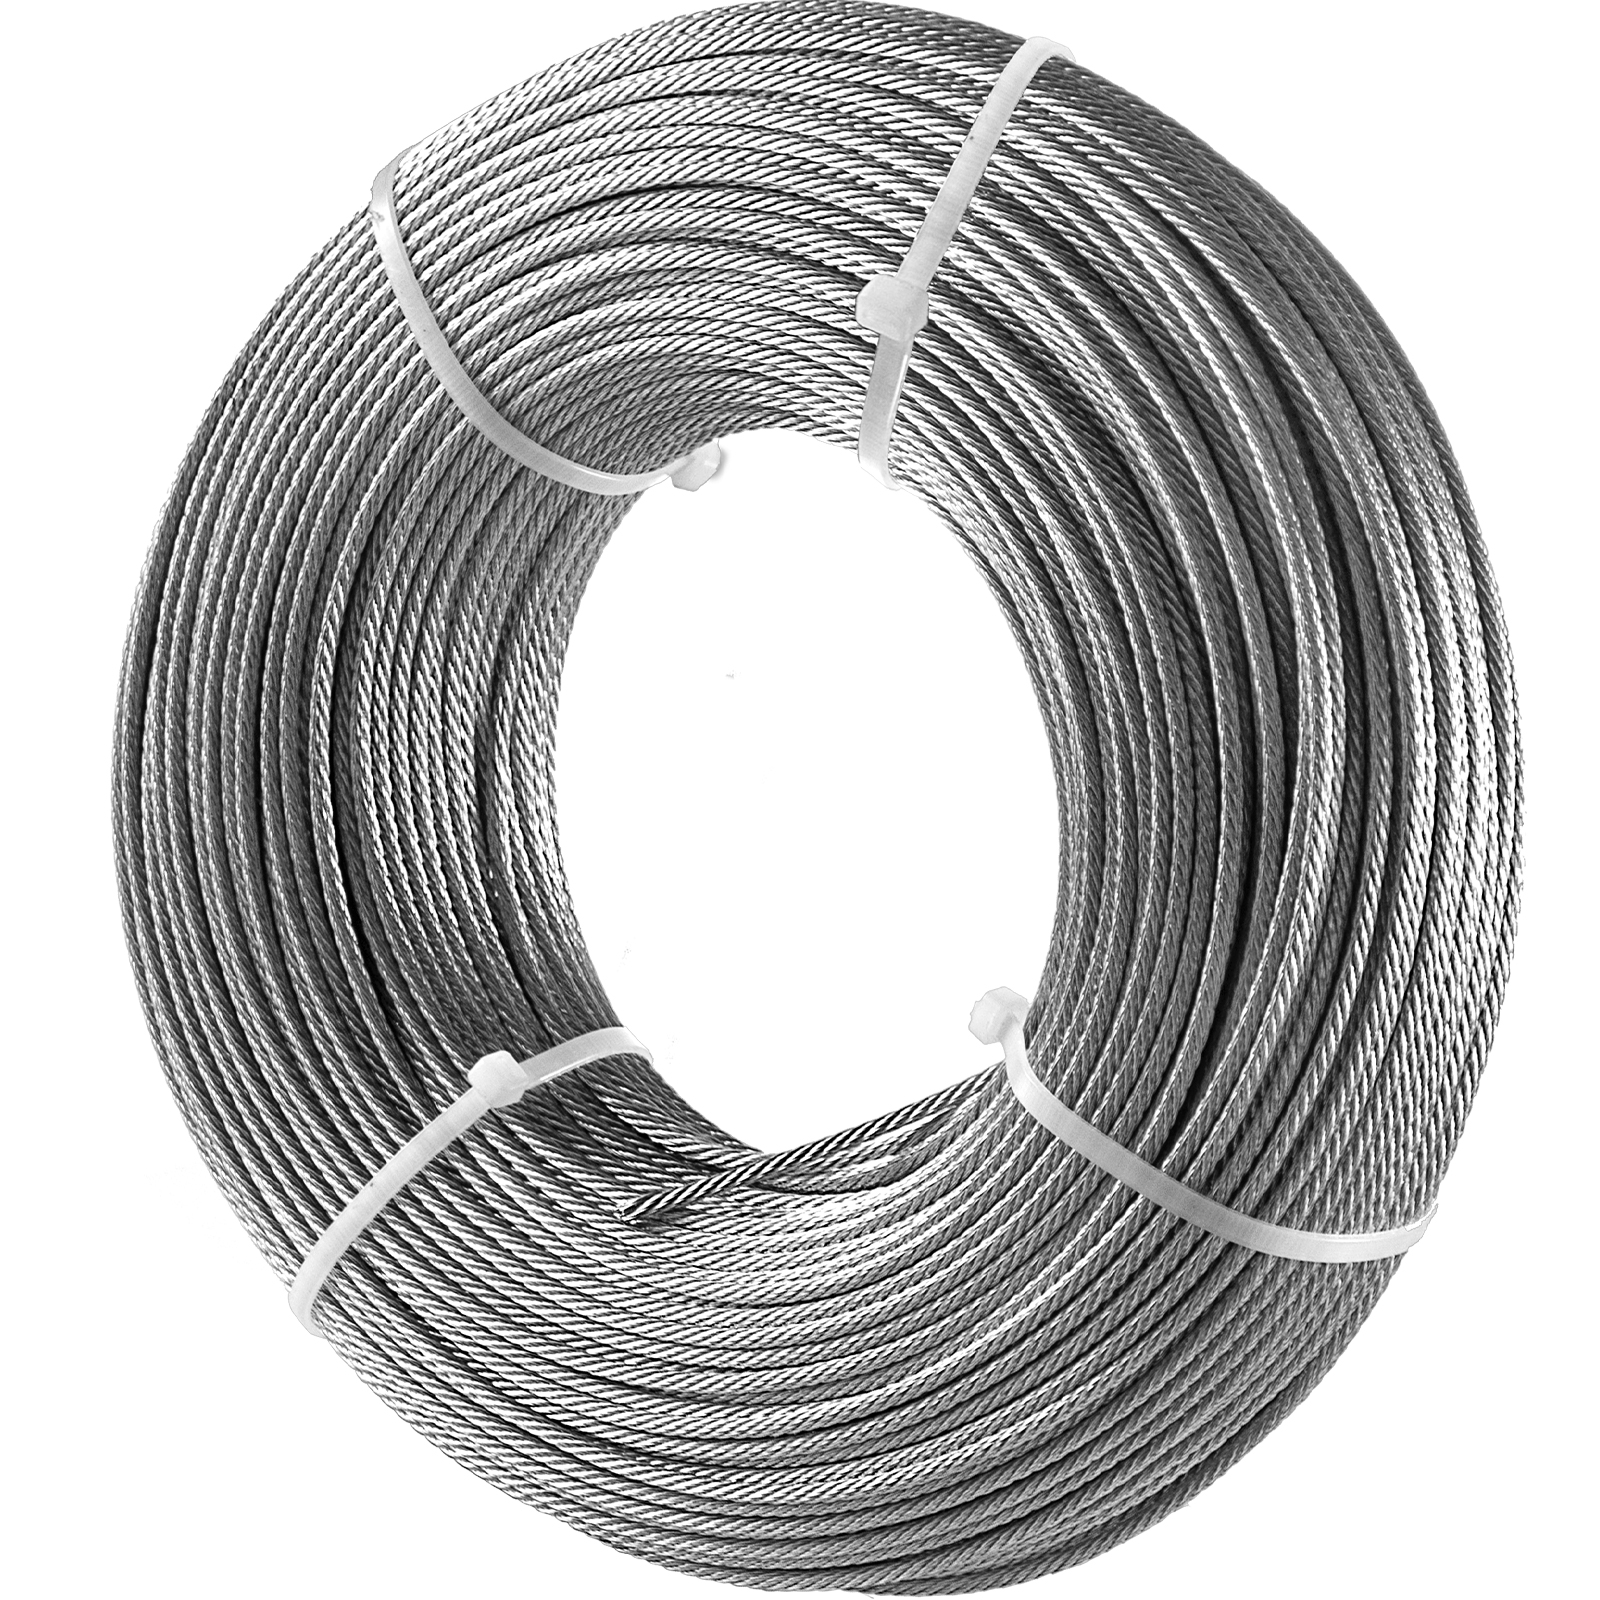 T316 1x19 Stainless Steel Cable Wire Rope 100,200,400,500,1000FT | eBay 1x19 Stainless Steel Wire Rope